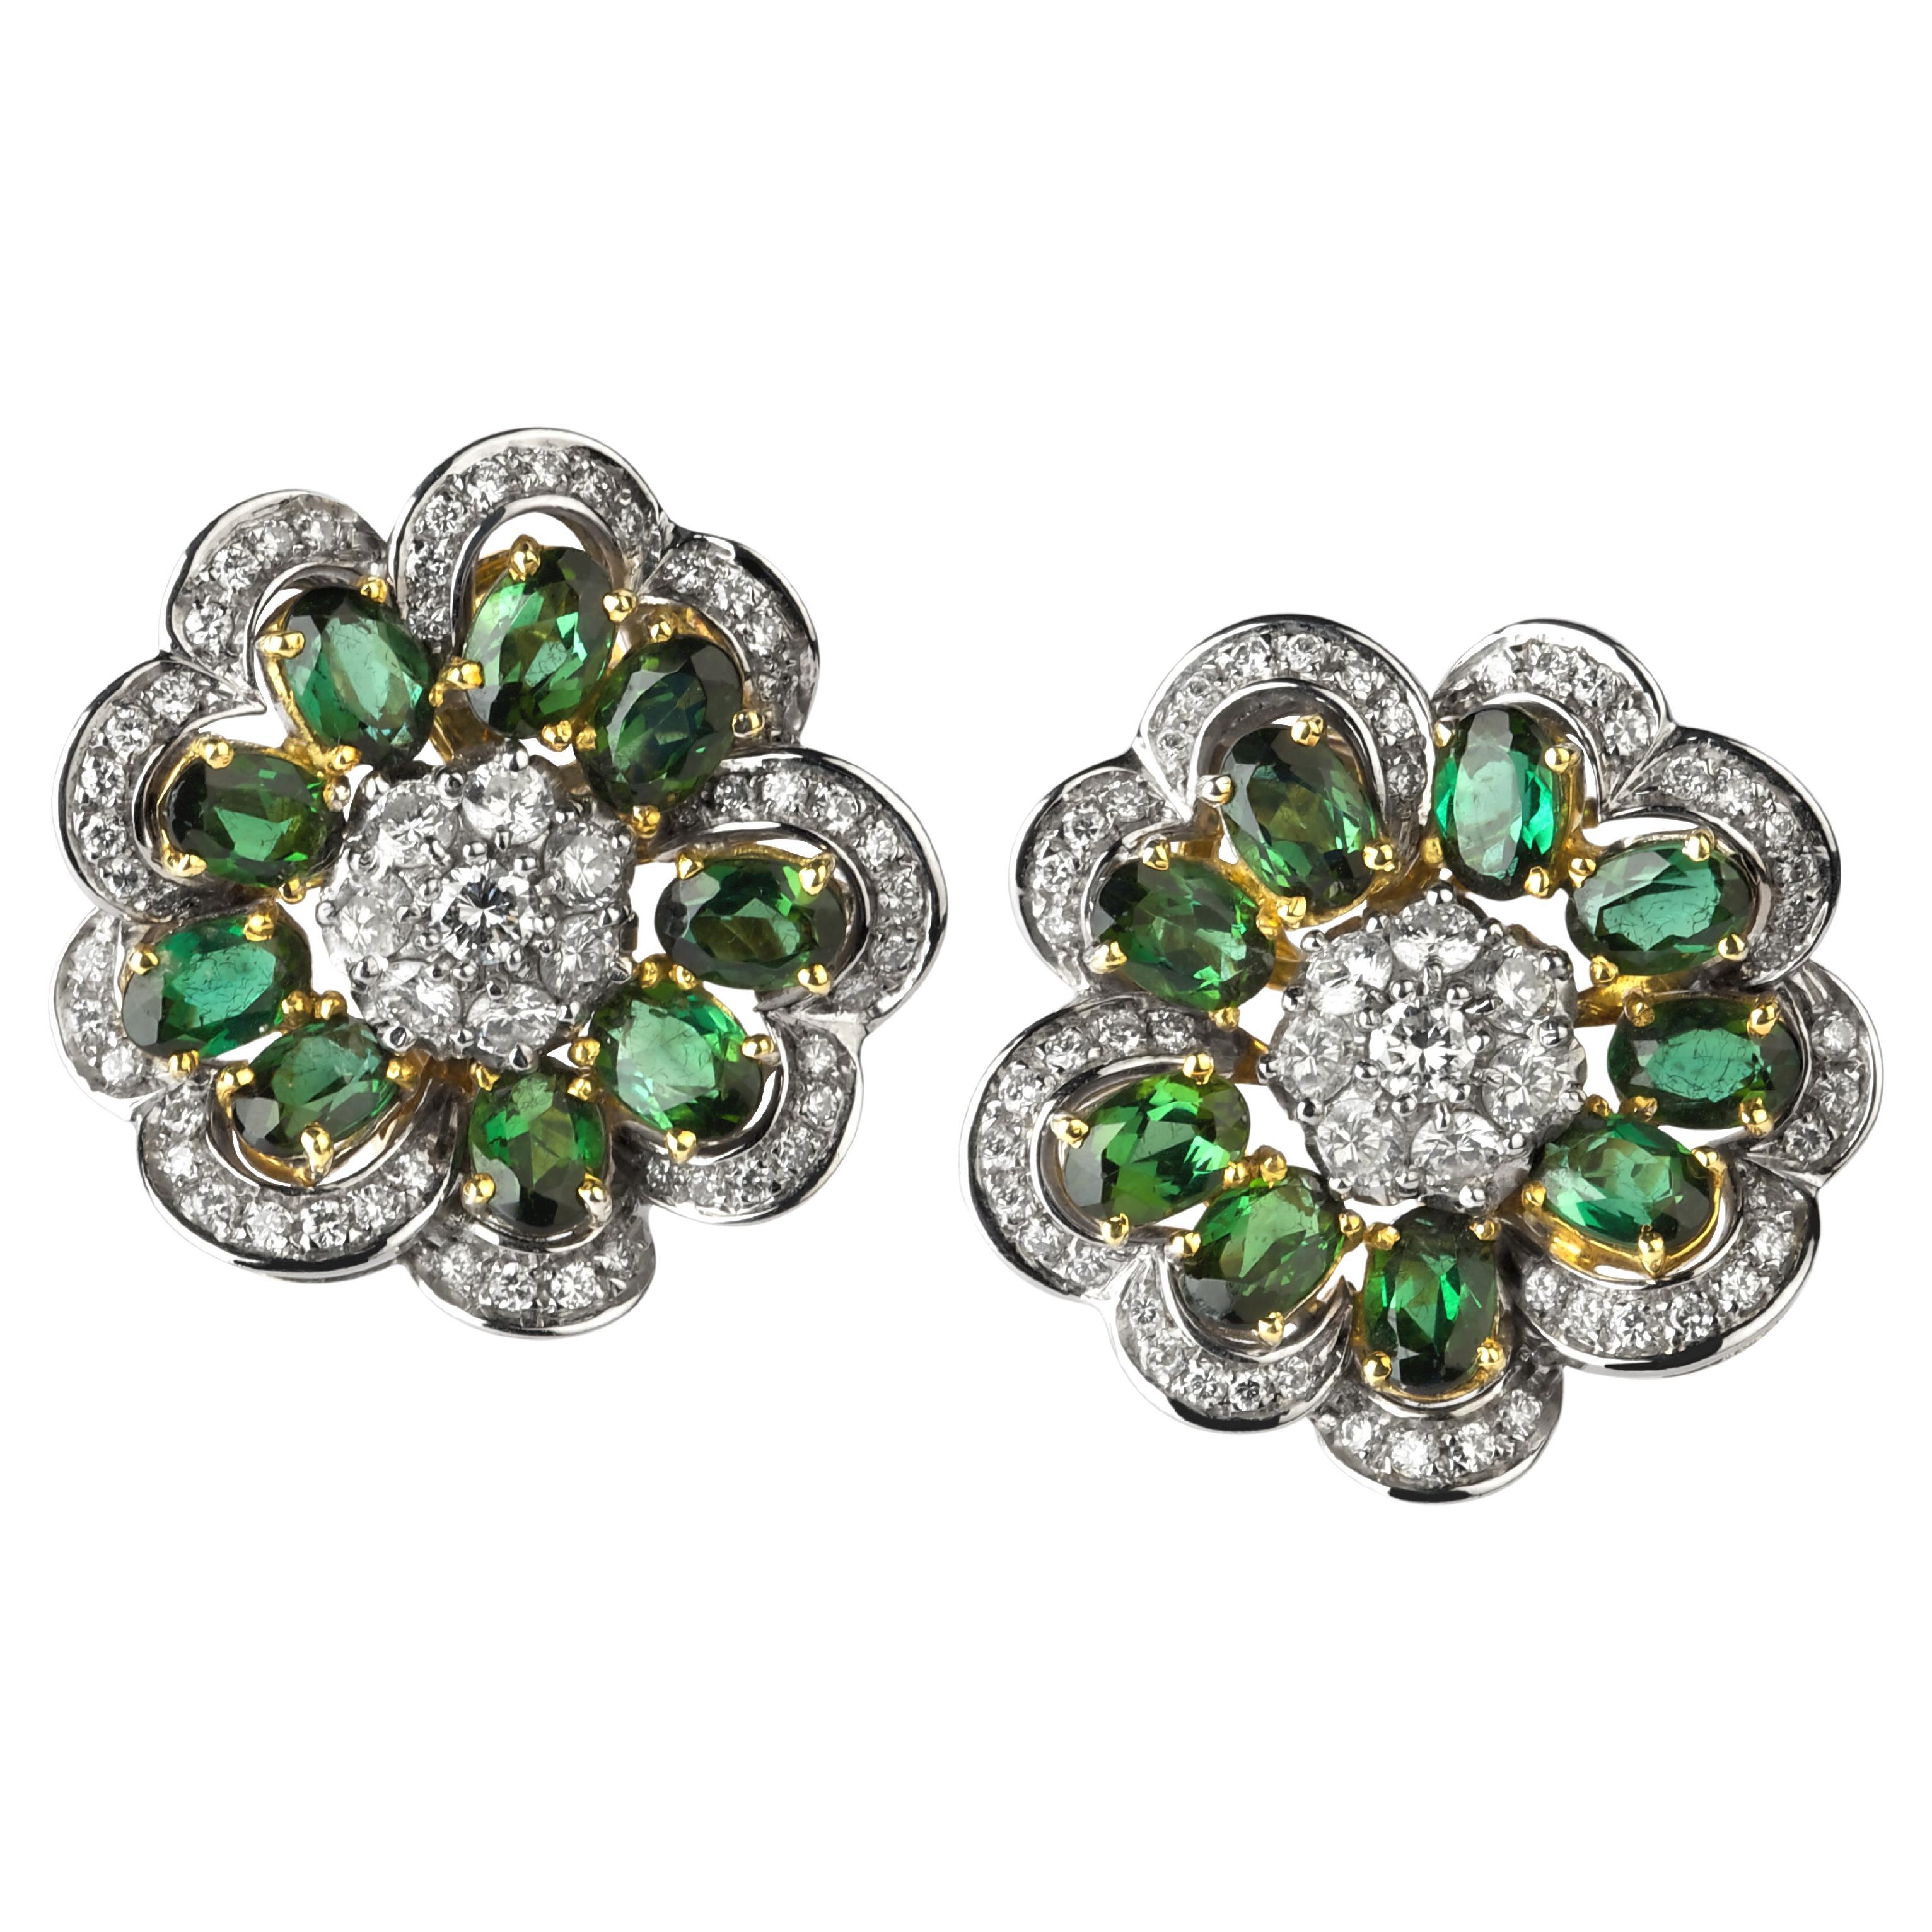 Vintage Earrings from ANGELETTI PRIVATE COLLECTION Gold Green Tourmaline Diamond